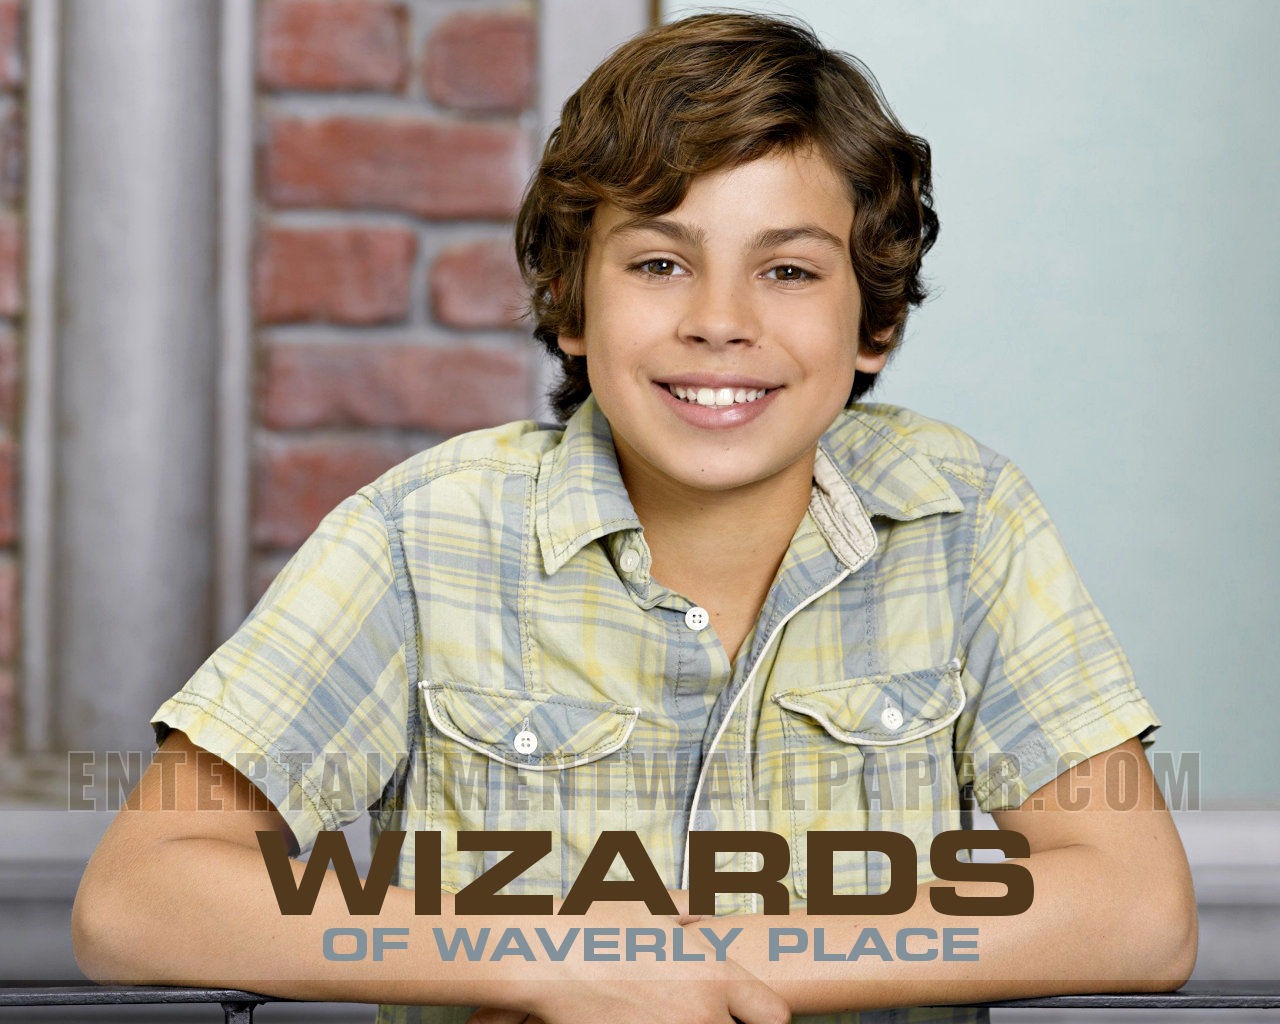 Wizards of Waverly Place Tapete #18 - 1280x1024